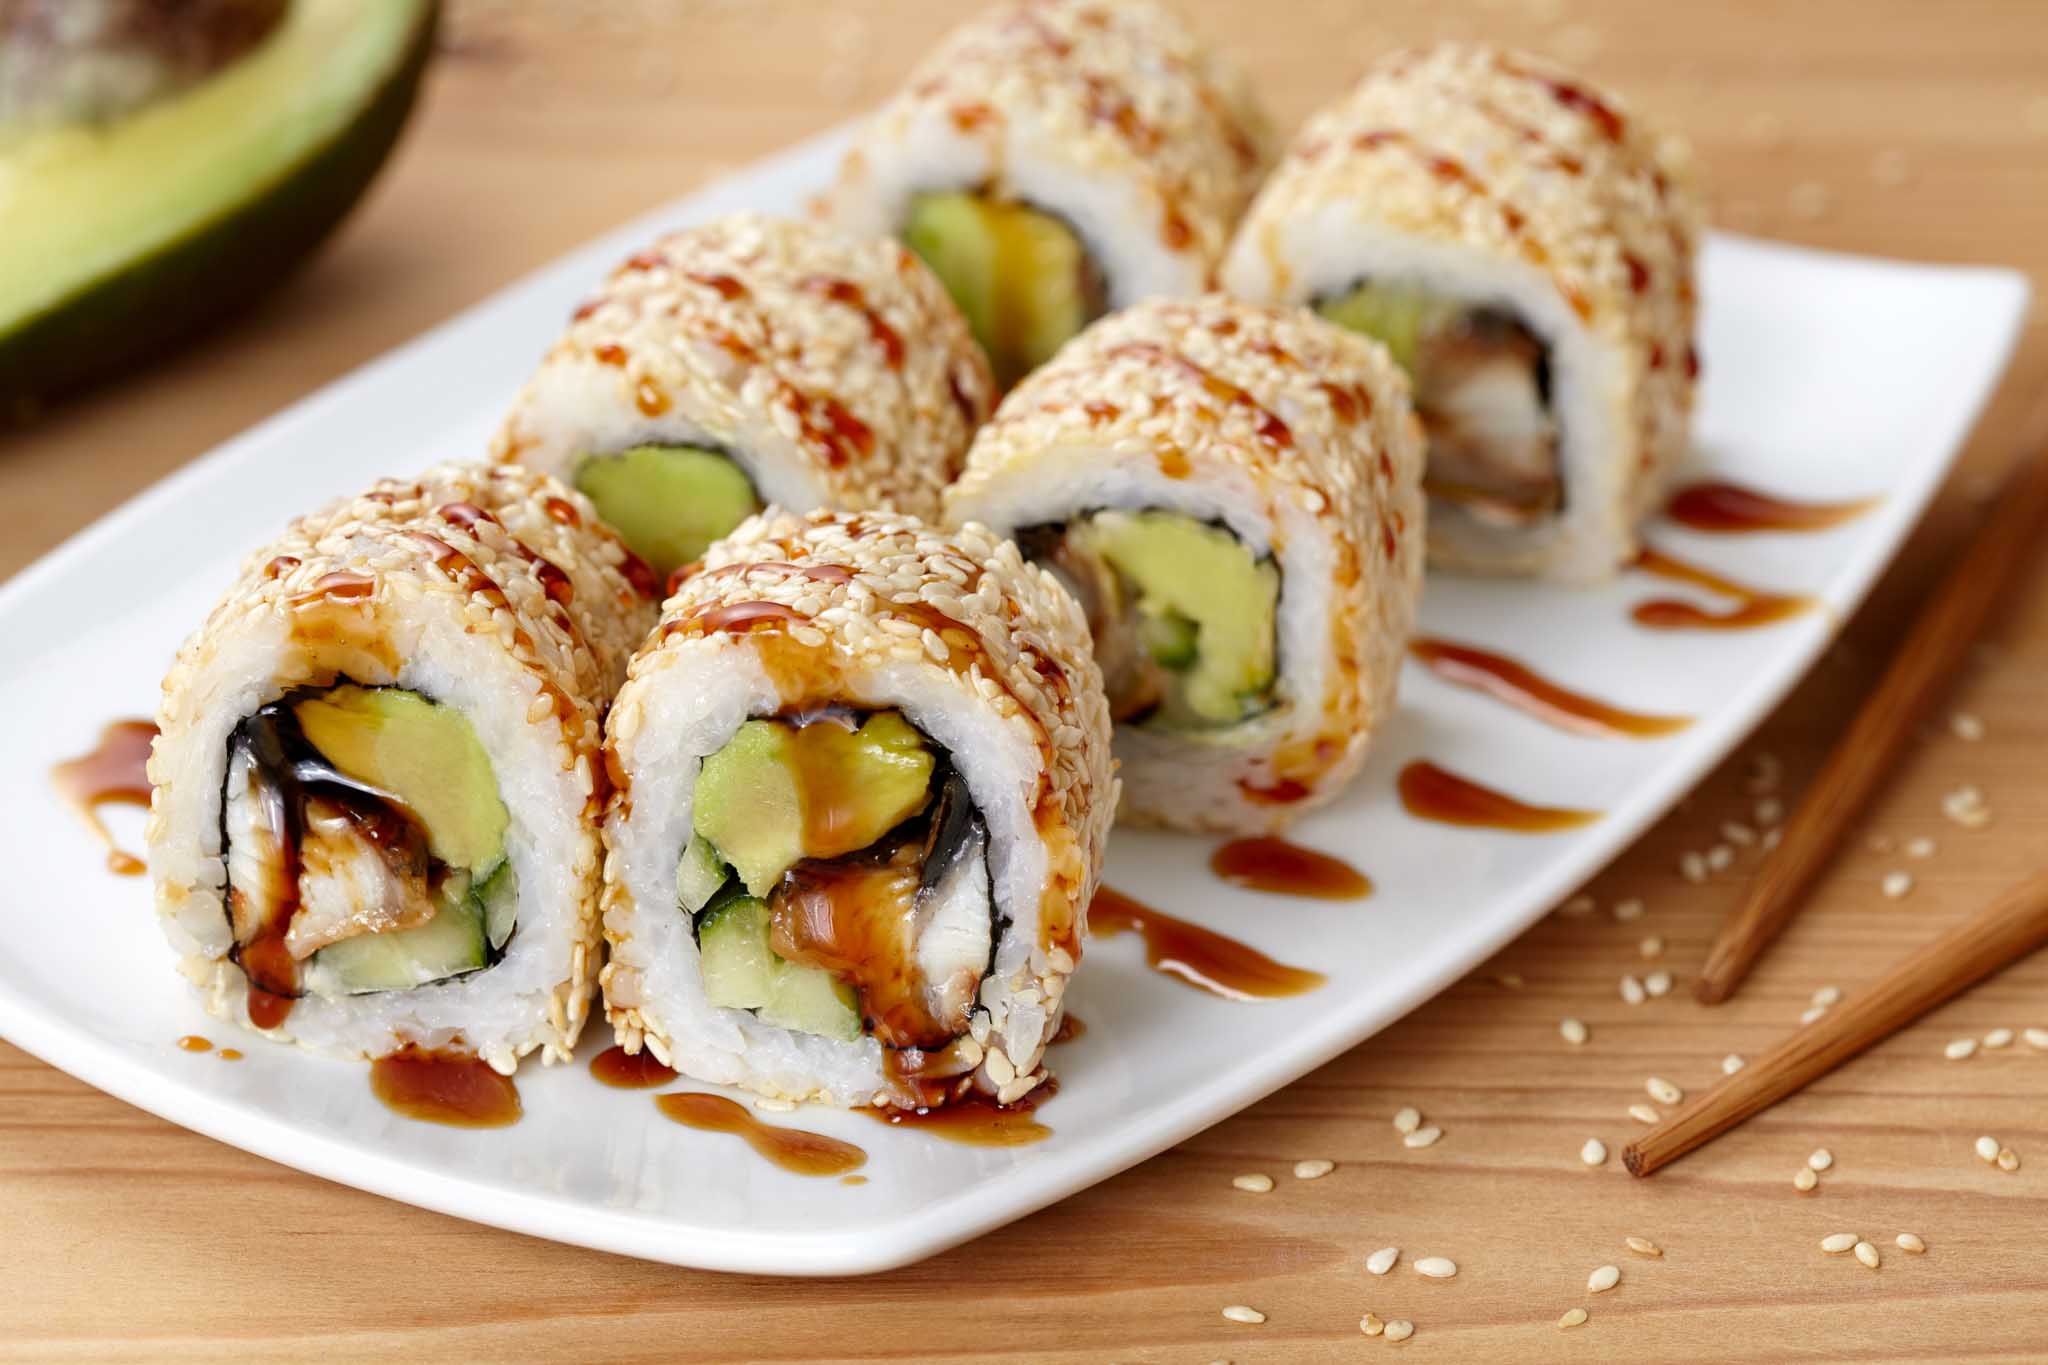 Fresh california rolls with avocado at The Real Food Academy Miami.